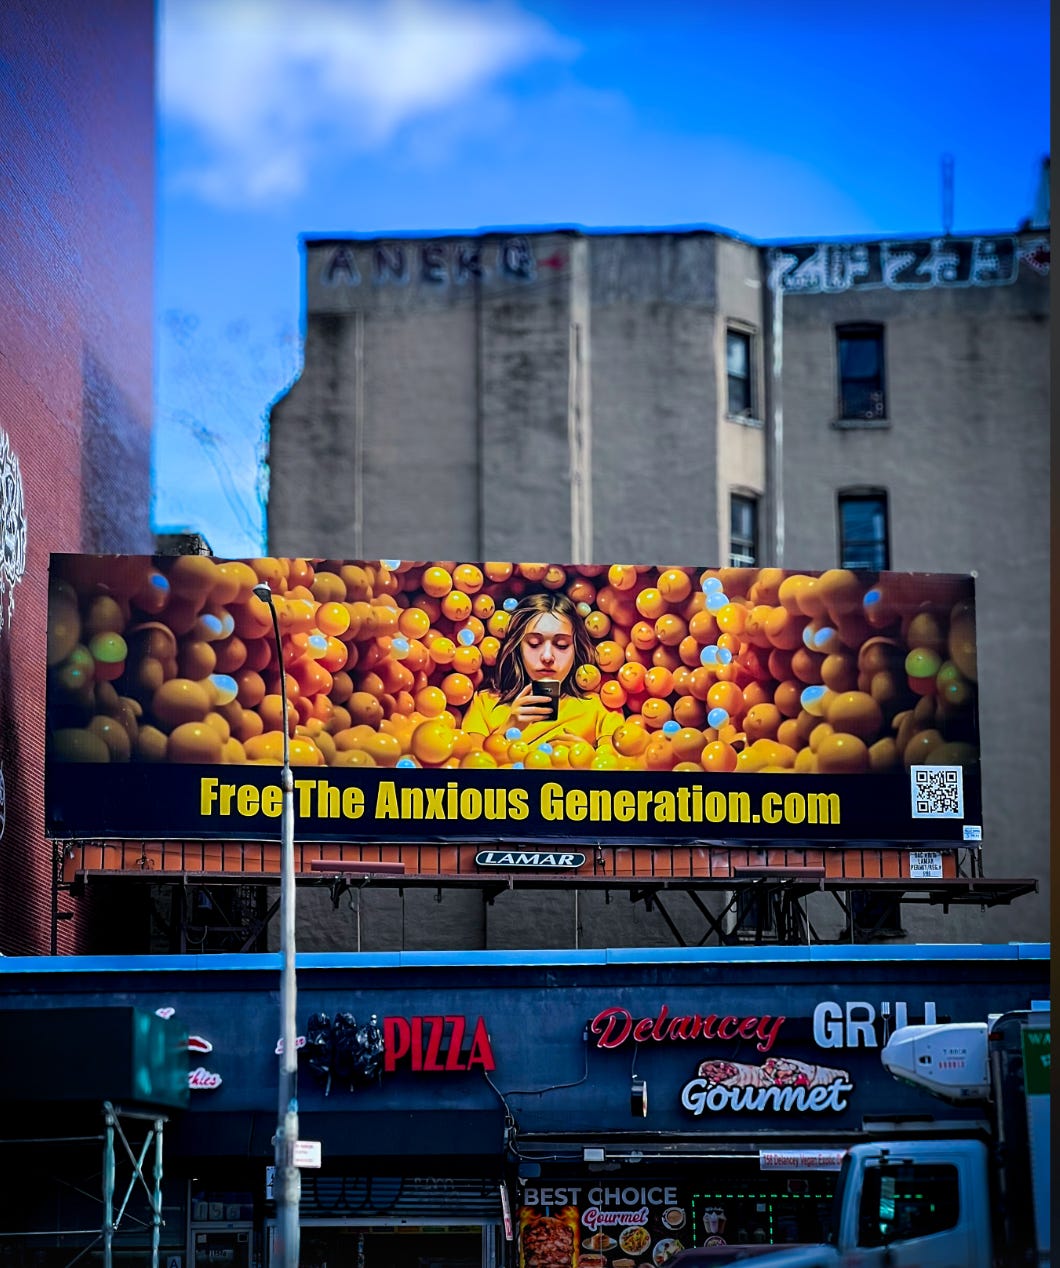 Billboard of The Anxious Generation in NYC